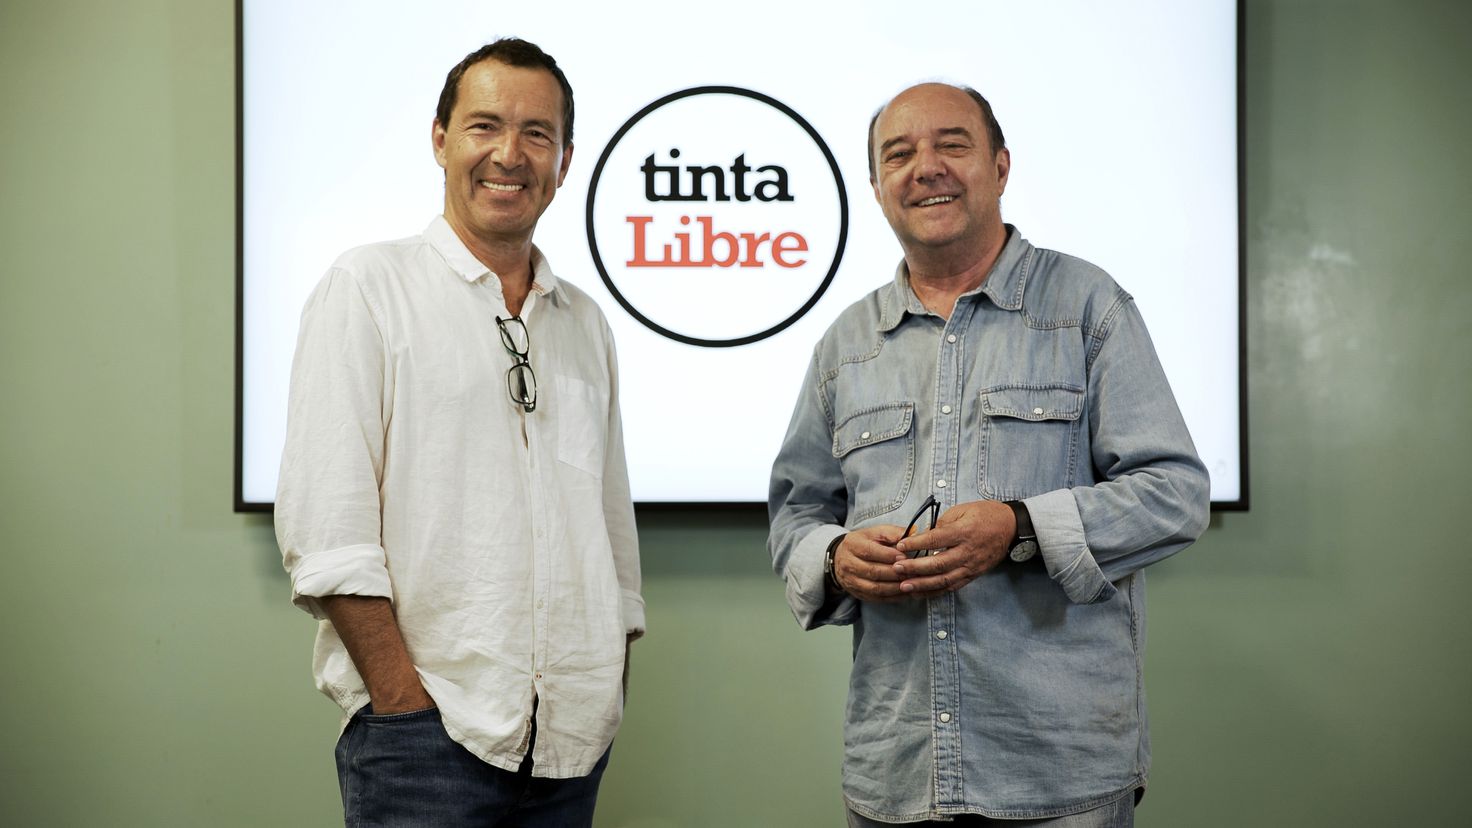 EL PAÍS and infoLibre will promote a new stage of 'tintaLibre' as a magazine of thought and culture
